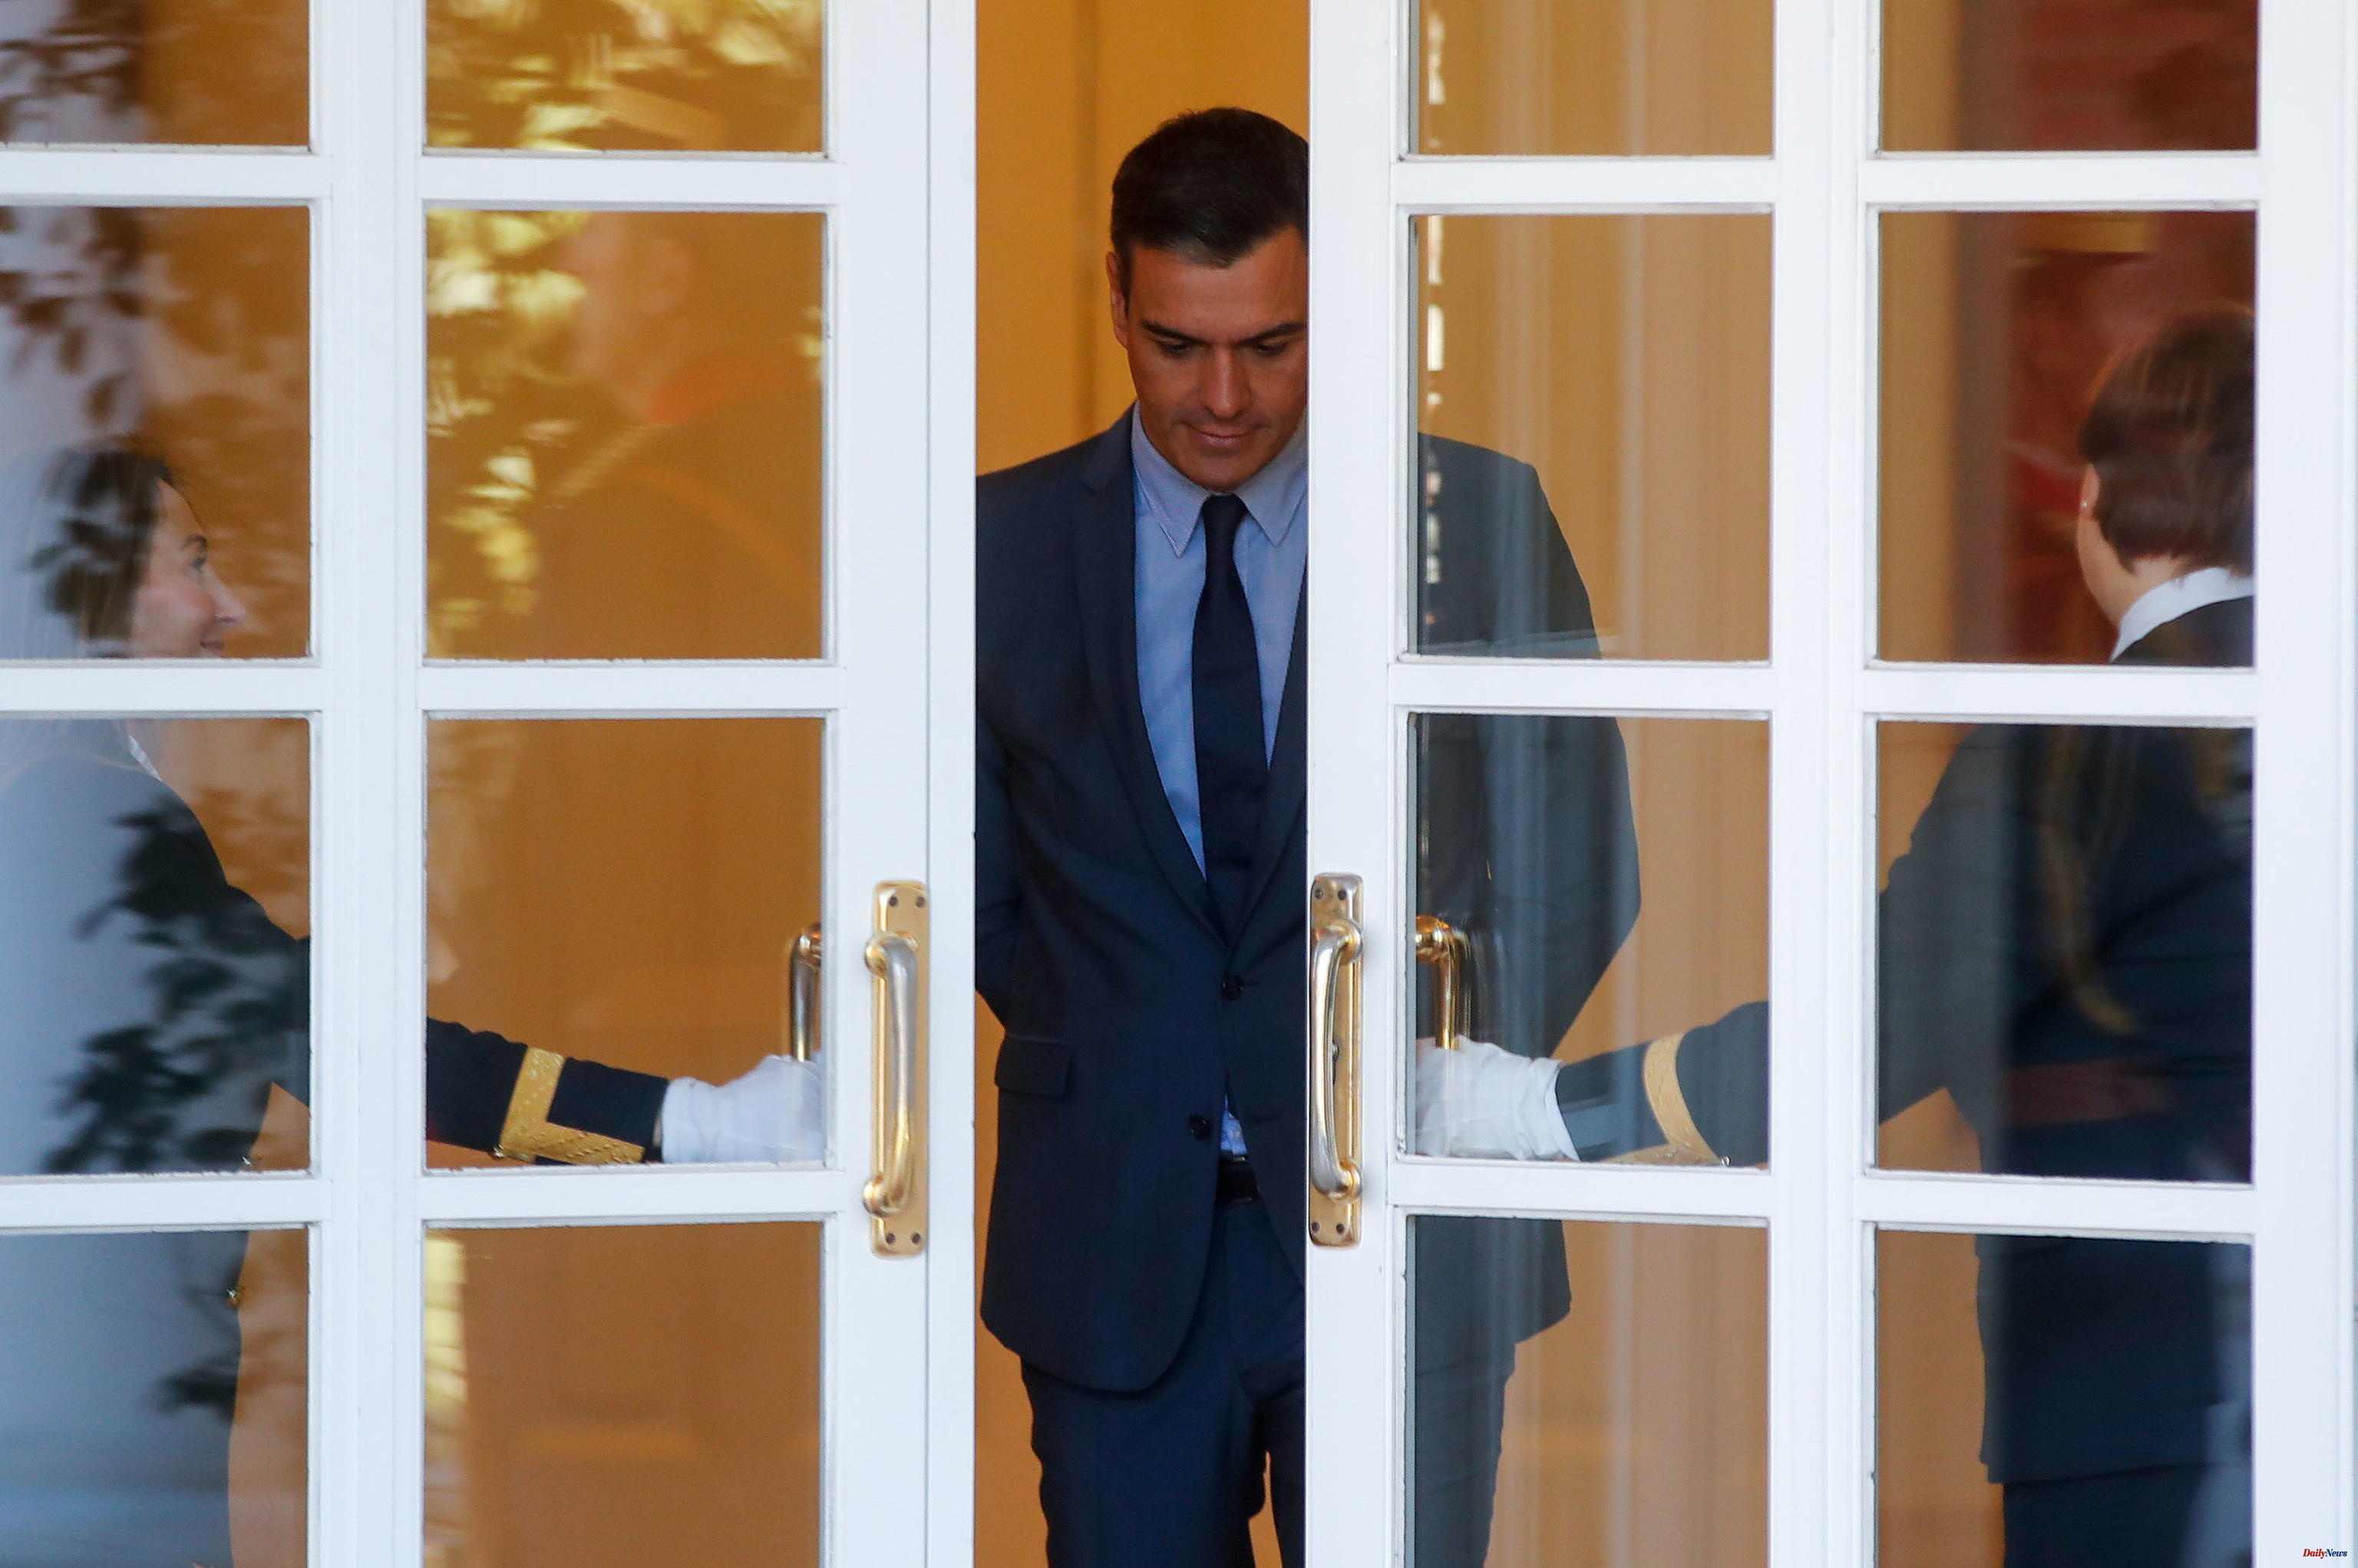 Foreign Affairs Mohamed VI will not receive Pedro Sánchez and summons him for a new visit to Morocco